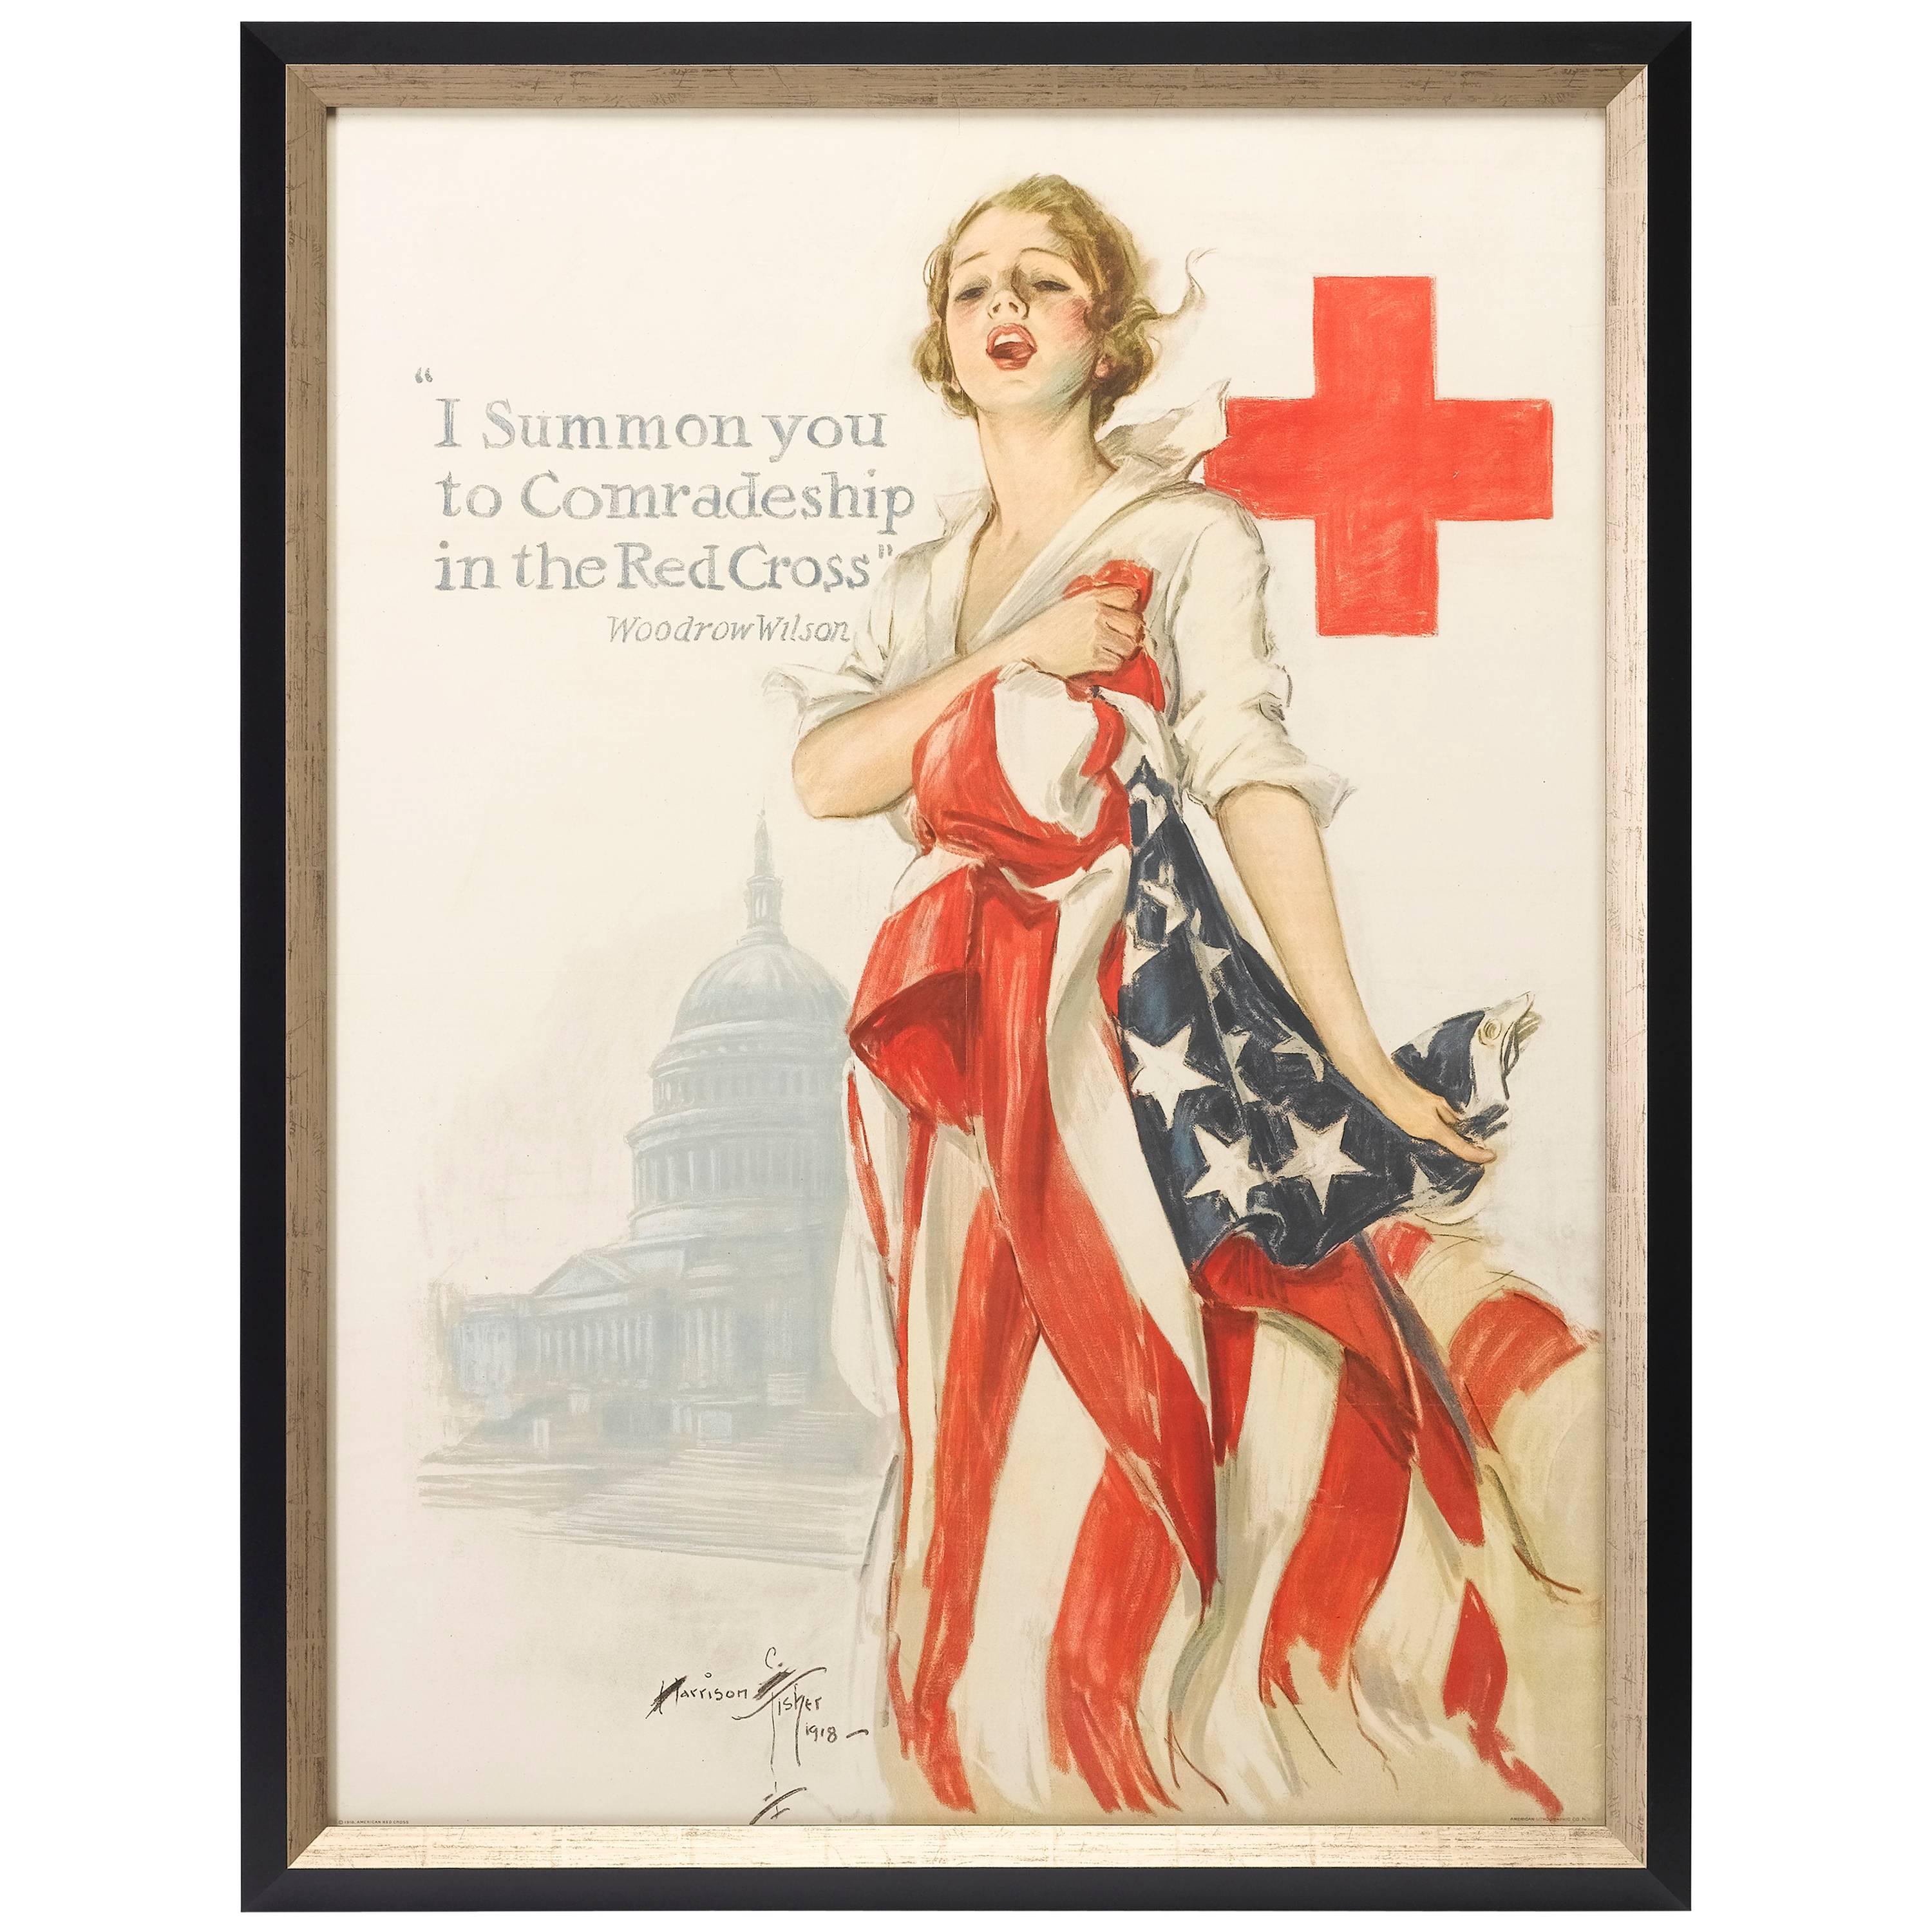 Red Cross WWI Patriotic Poster, Woodrow Wilson Quote by Harrison Fisher, 1918